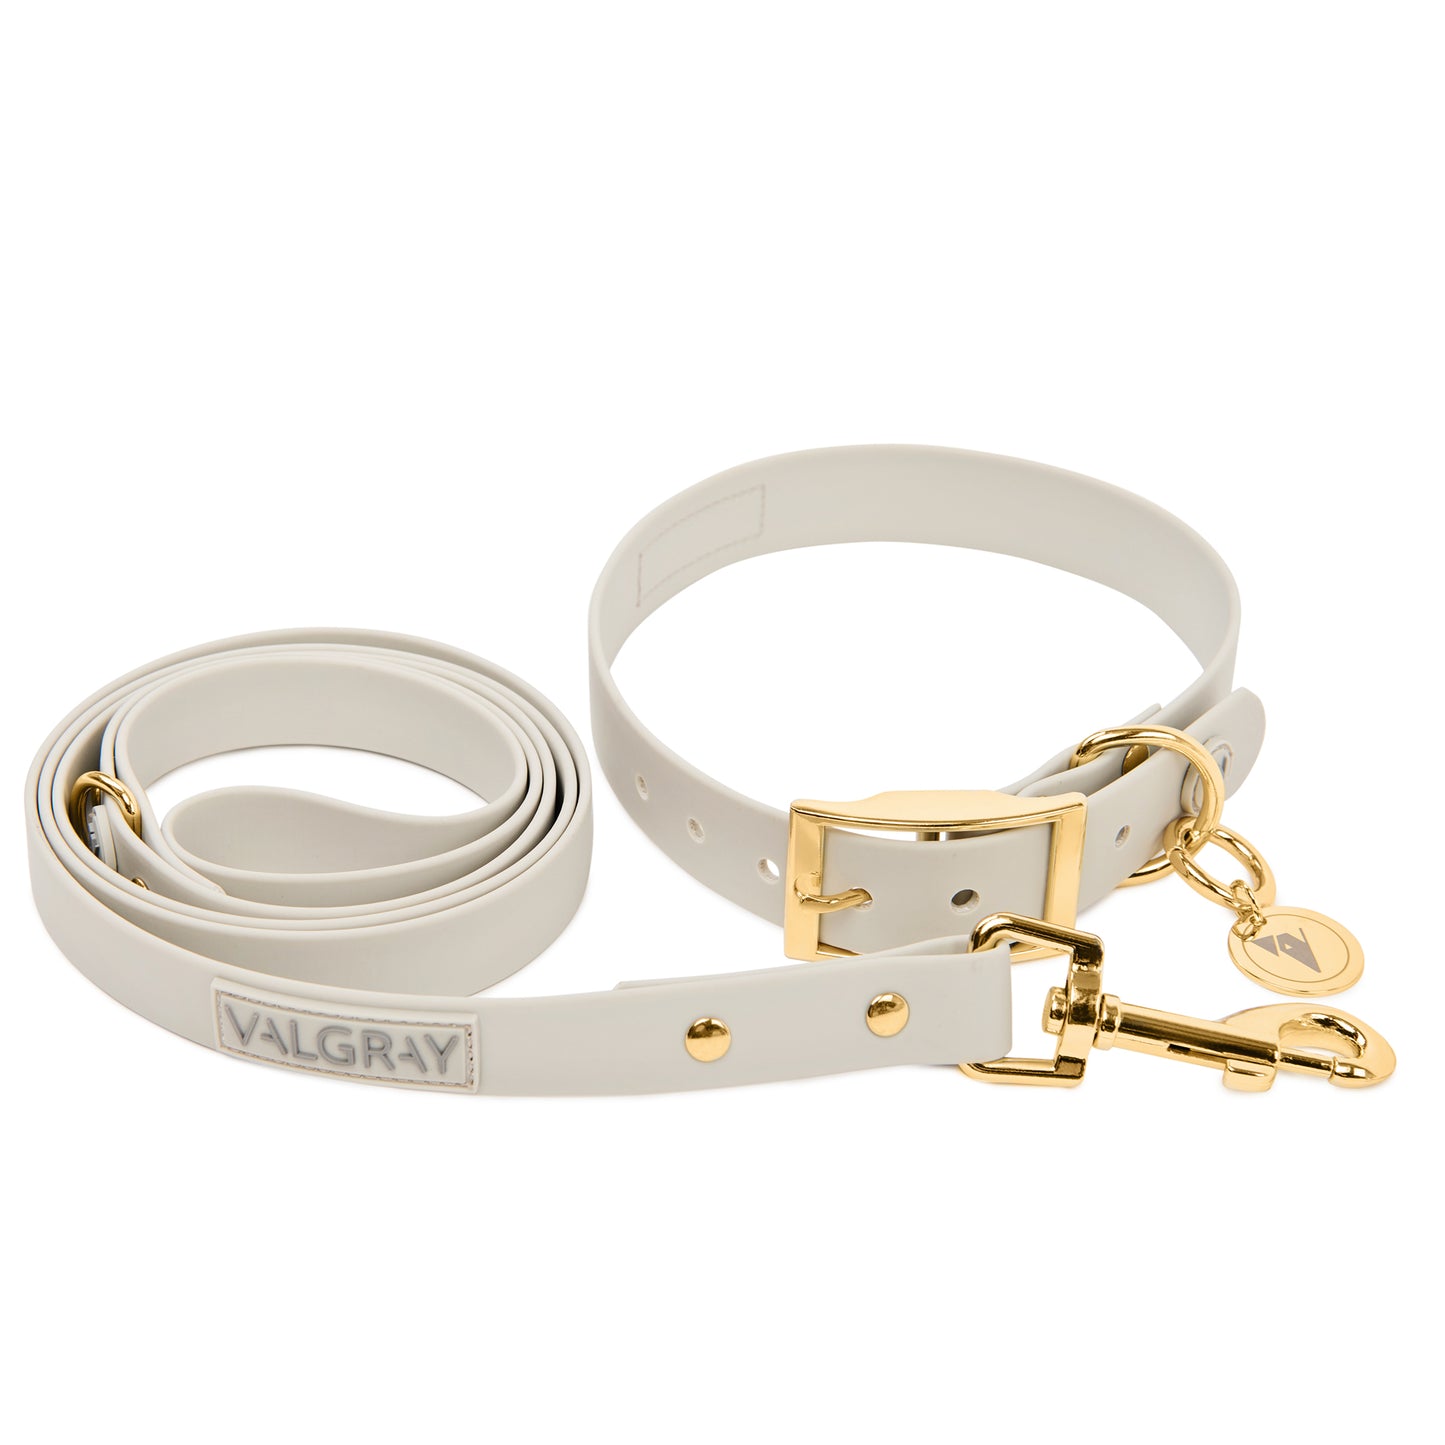 Separate Product Image - Large Luxury Grey & Gold Valgray Dog Collar & Dog Leash Set From Pets Planet | SA's No.1 ePet Store for Premium Pet products, dog collars, dog leashes & pet beds